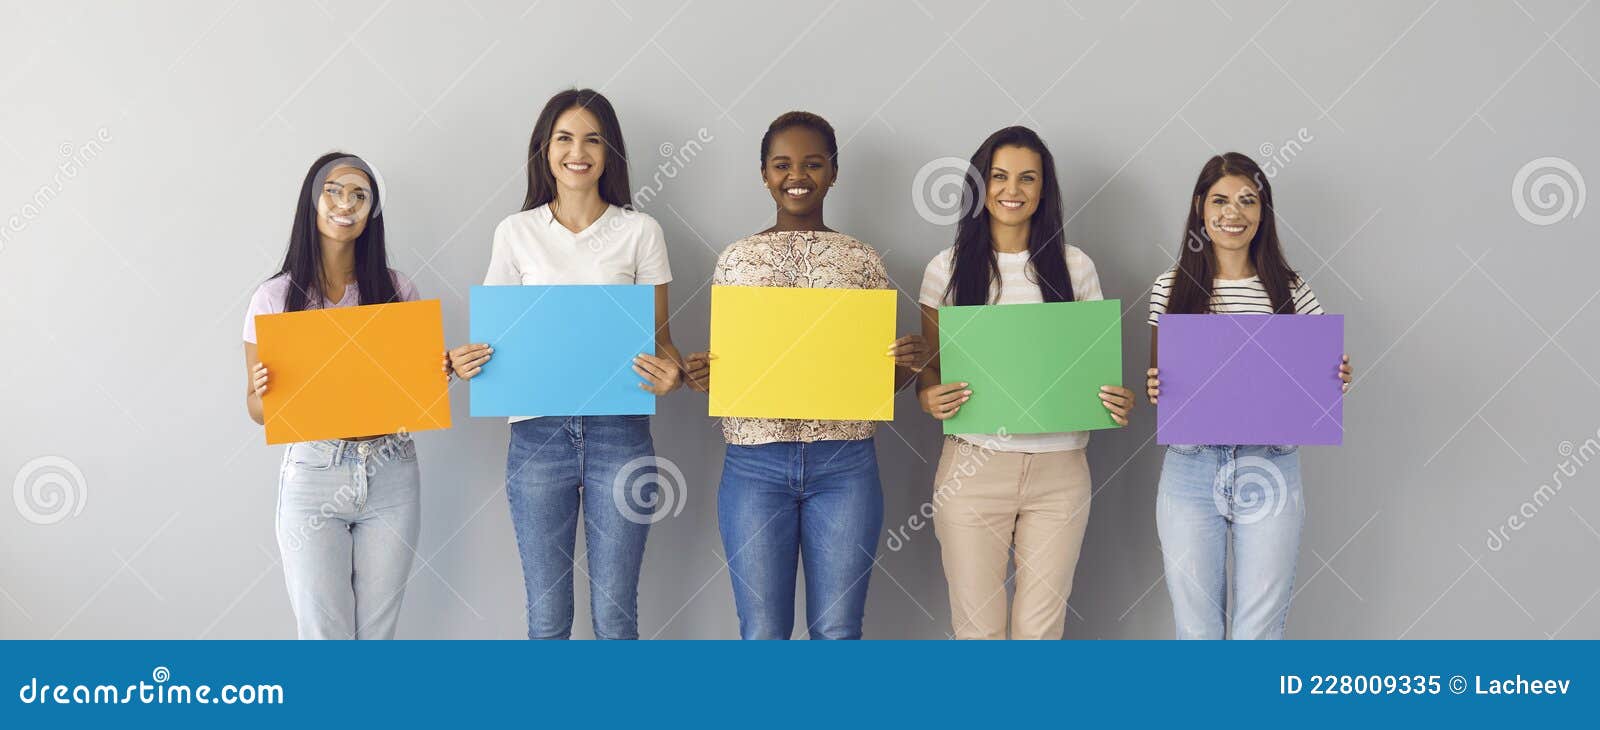 Diverse Group of Happy Young Women Standing Together and Holding Mockup  Paper Banners Stock Image - Image of blank, group: 228009335